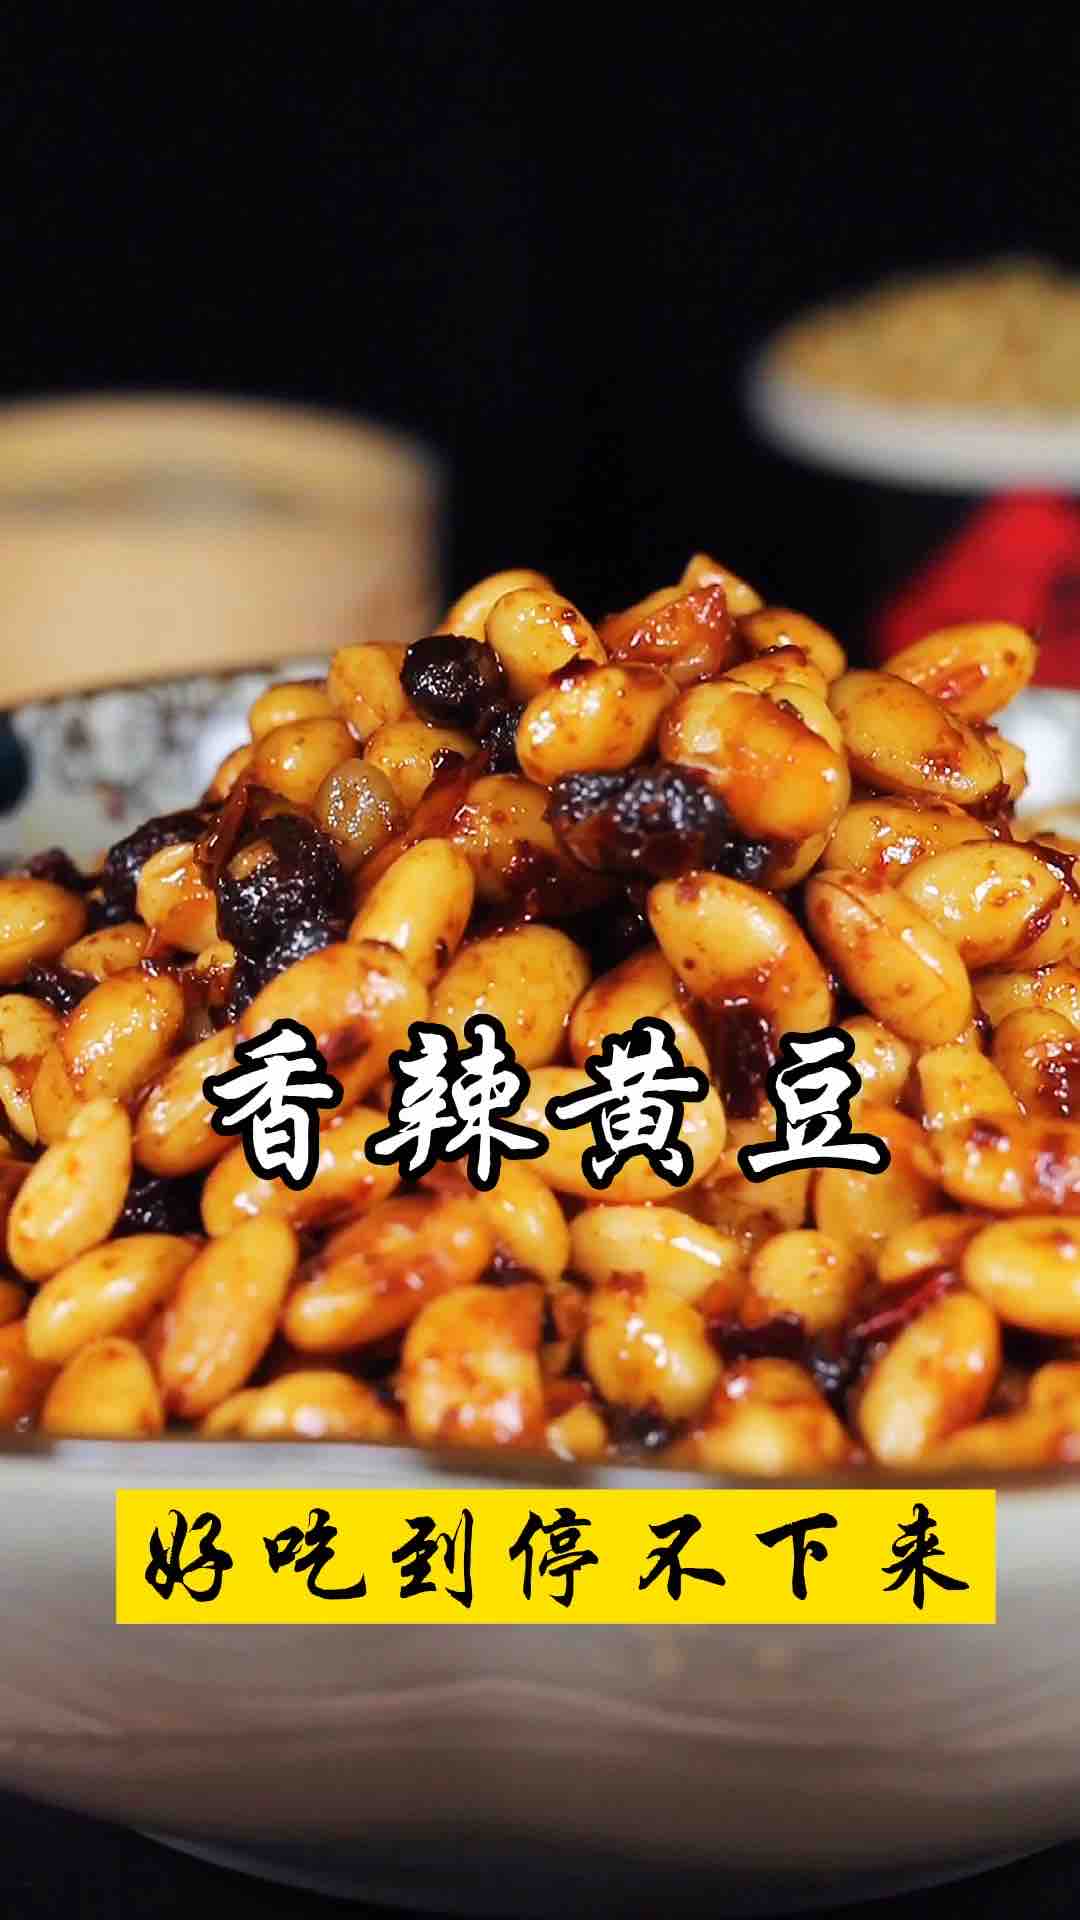 Spicy Soy Dish